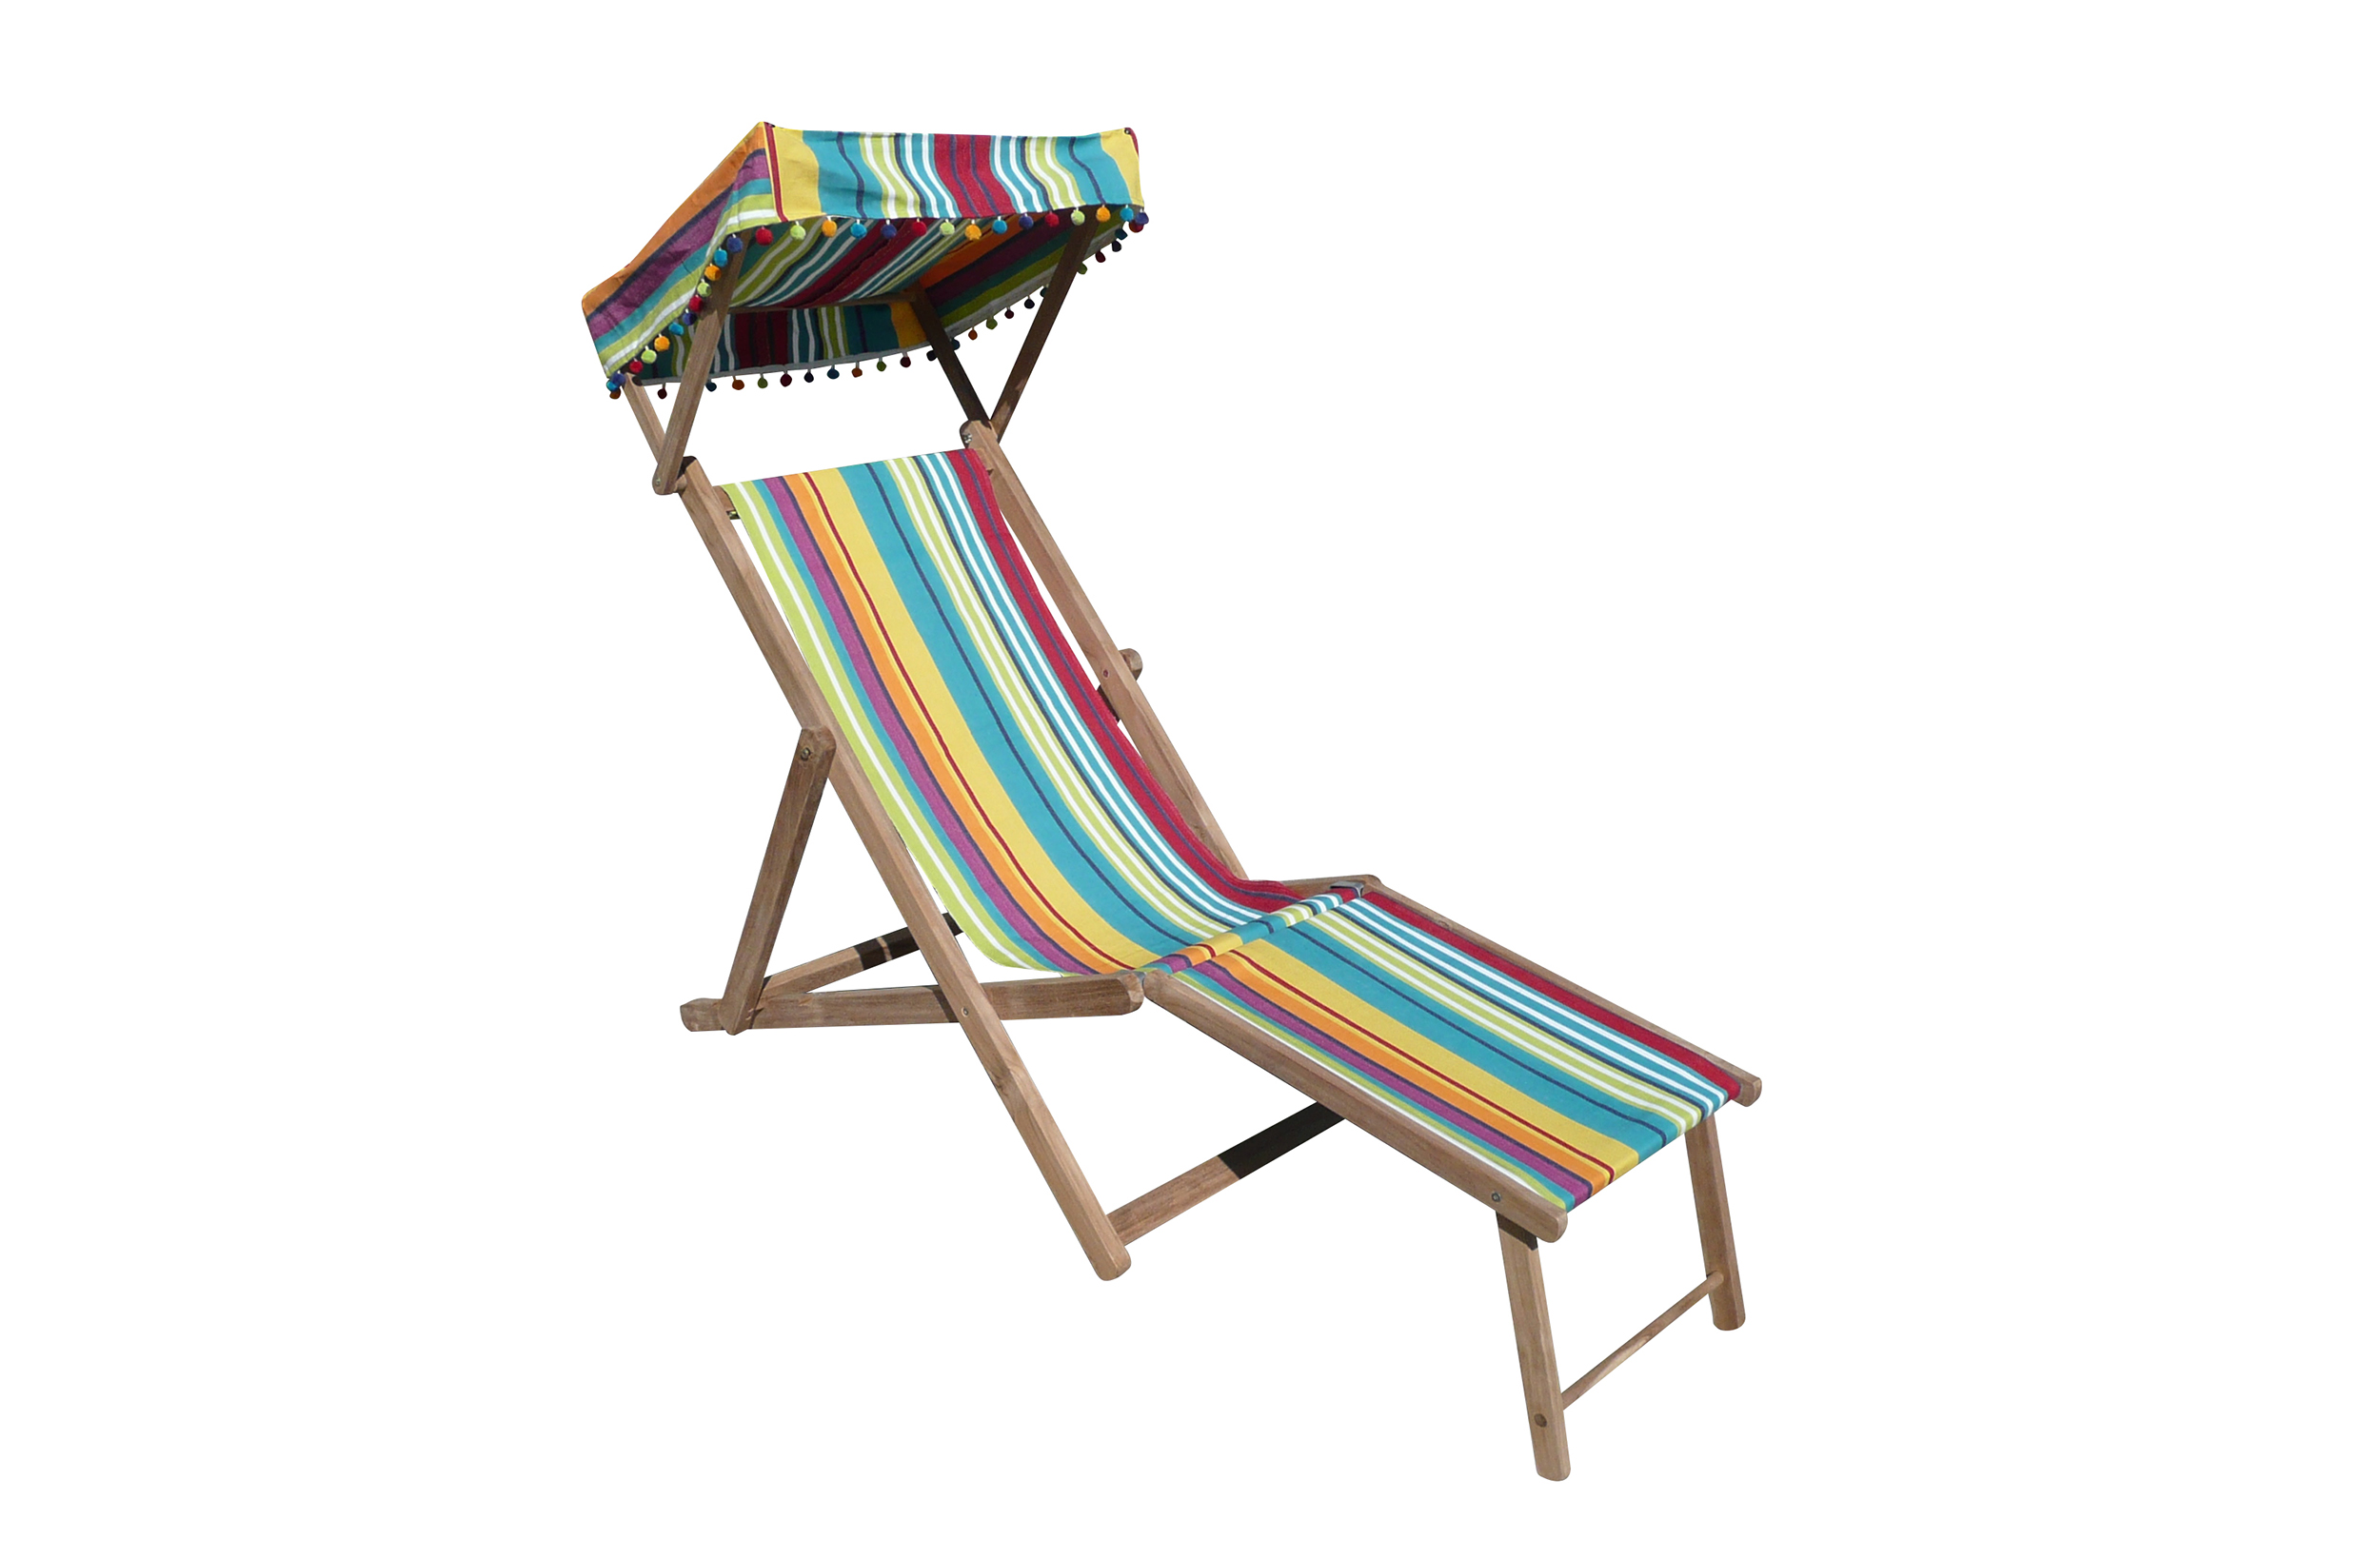 Turquoise, Green and Red Edwardian Deckchair with Canopy and Footstool